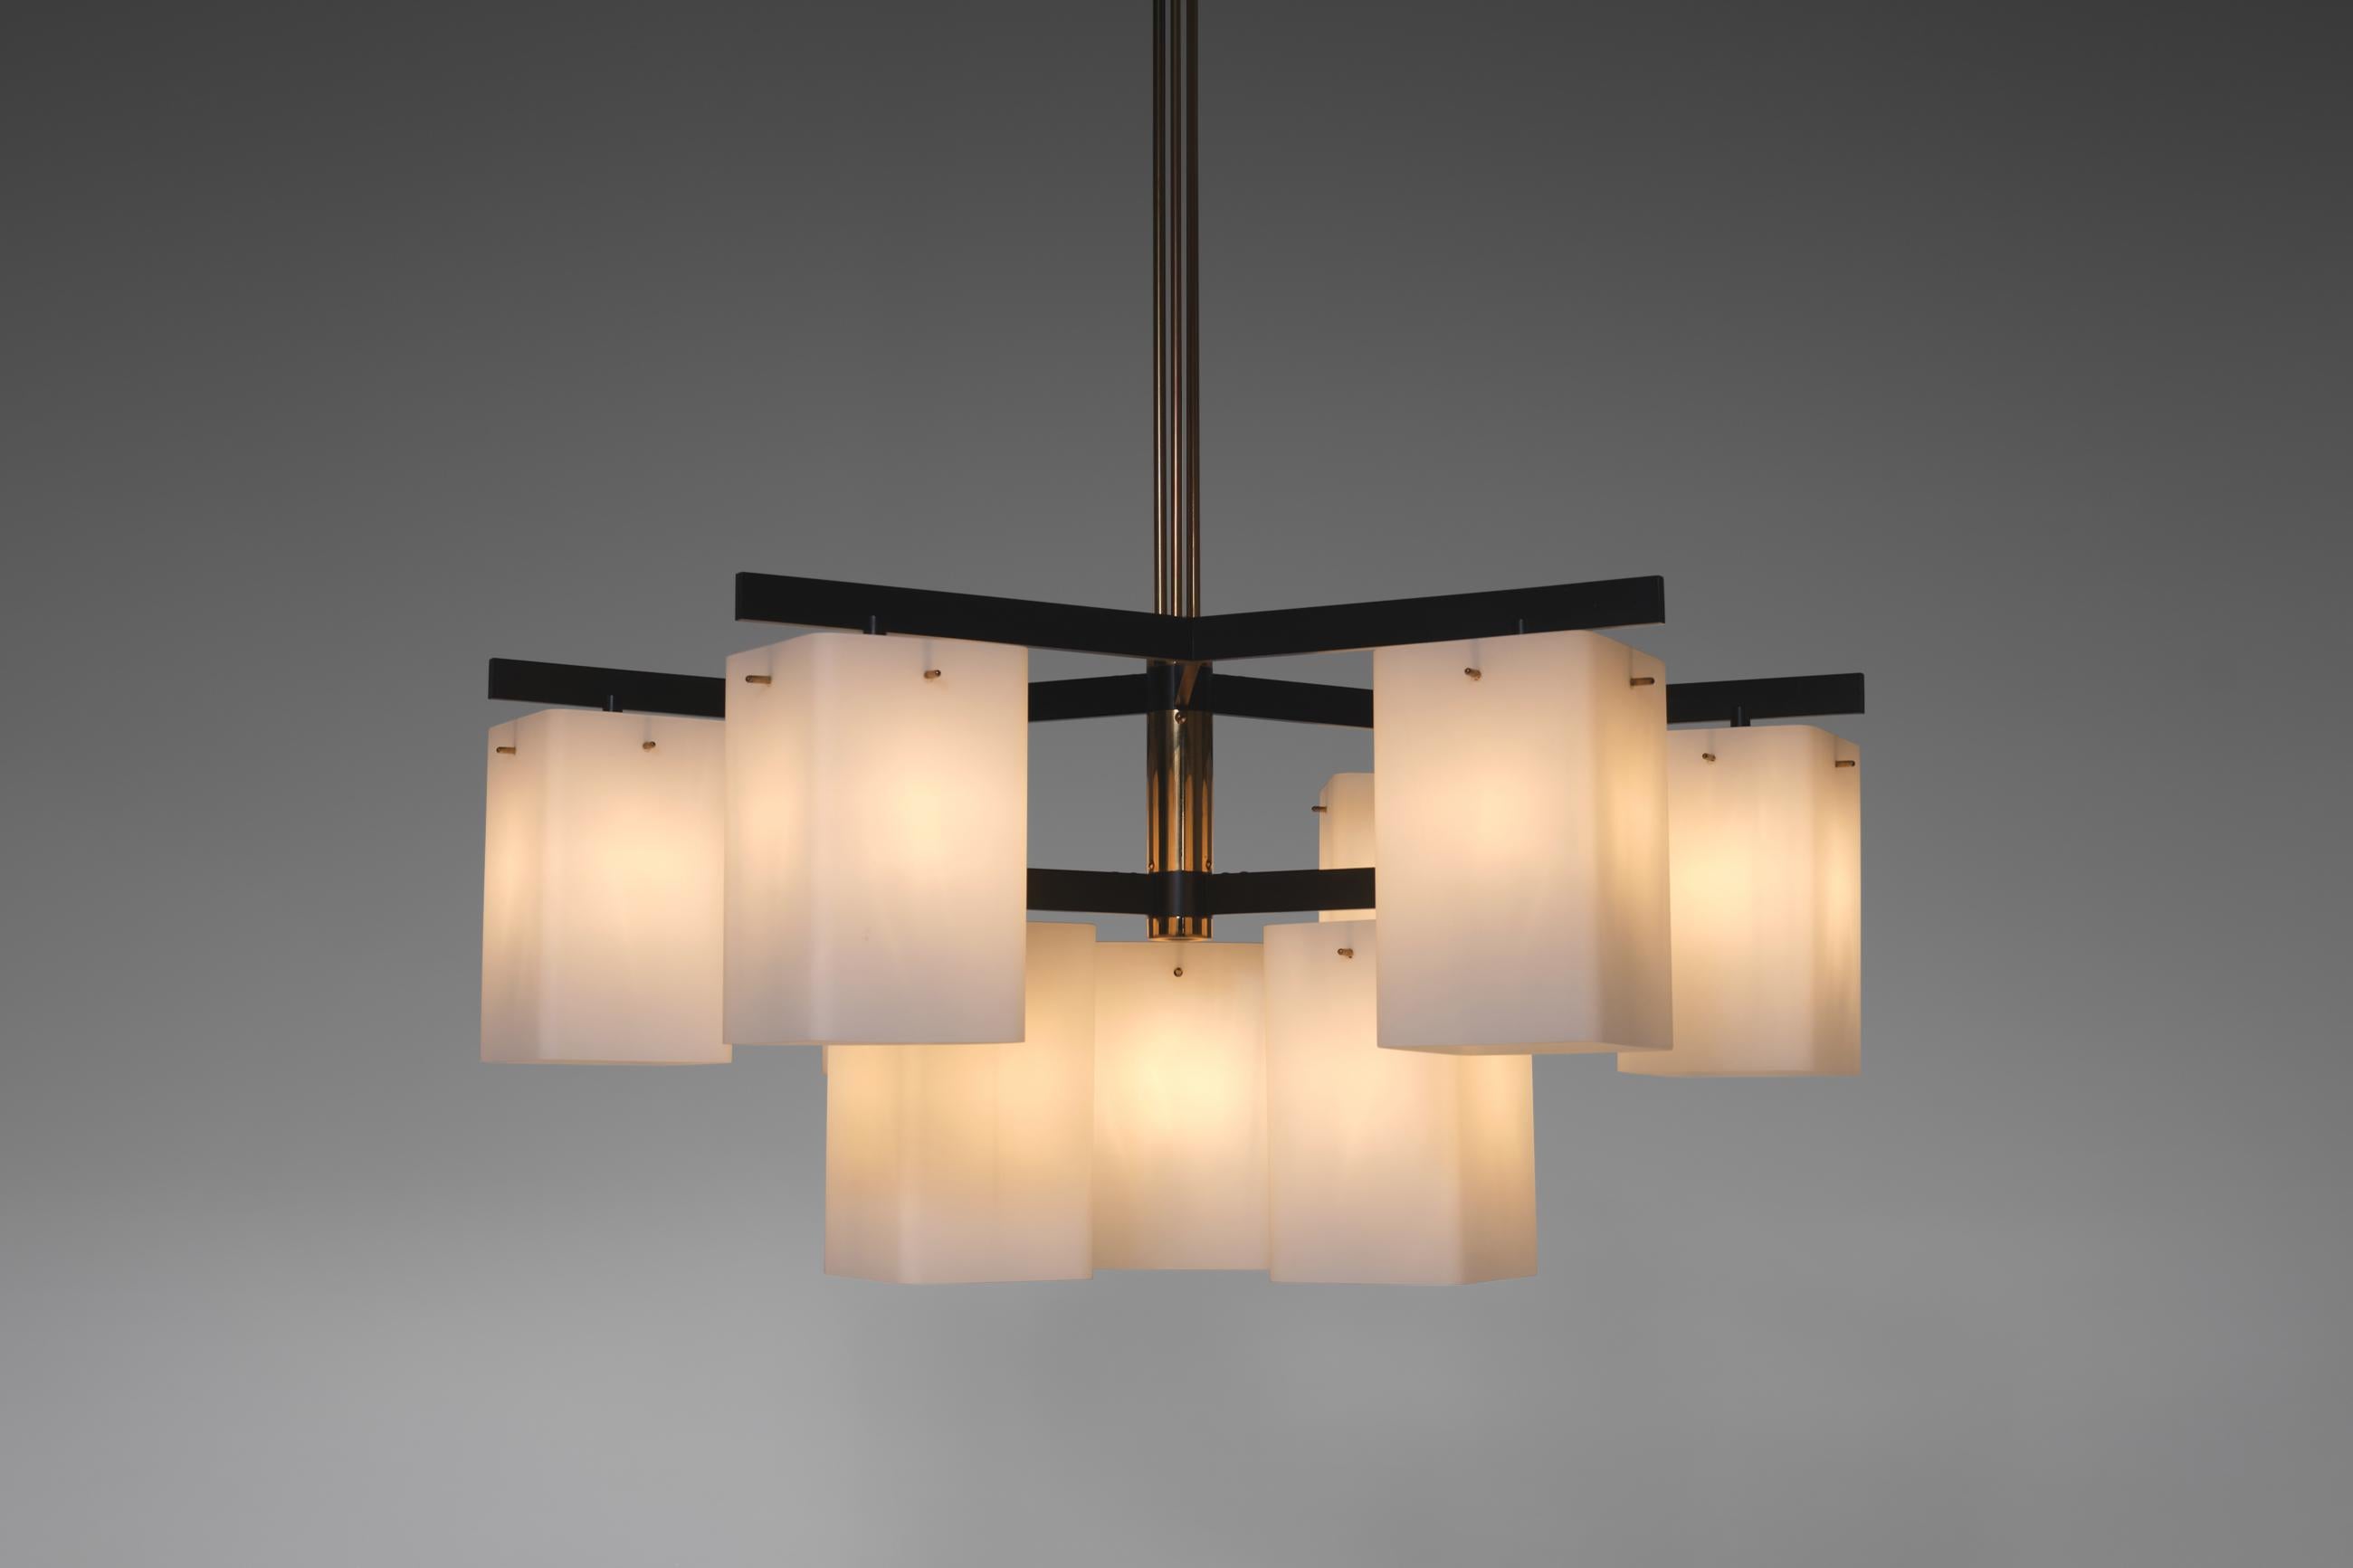 Spectacular chandelier by Bruno Gatta Stilnovo, Italy 1950's. The chandelier is made from a strong solid brass frame, the arms are finished in a Matt black lacquer and it has eight matt opal glass shades, all from a very high quality. The